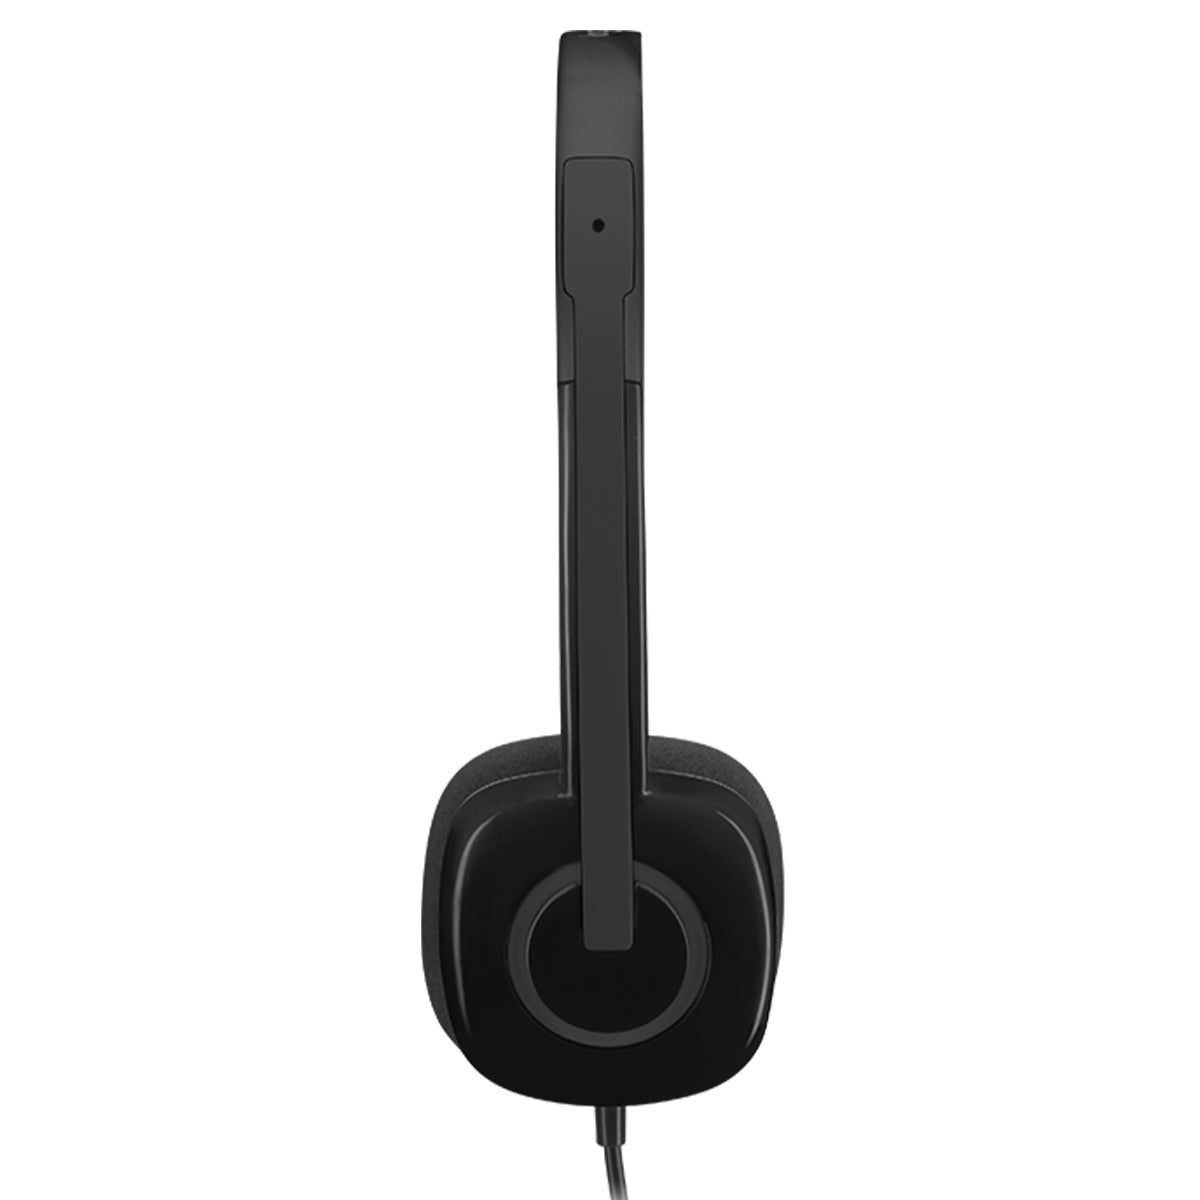 Logitech H151 Wired Stereo 3.5mm Headphone with Rotatable Microphone